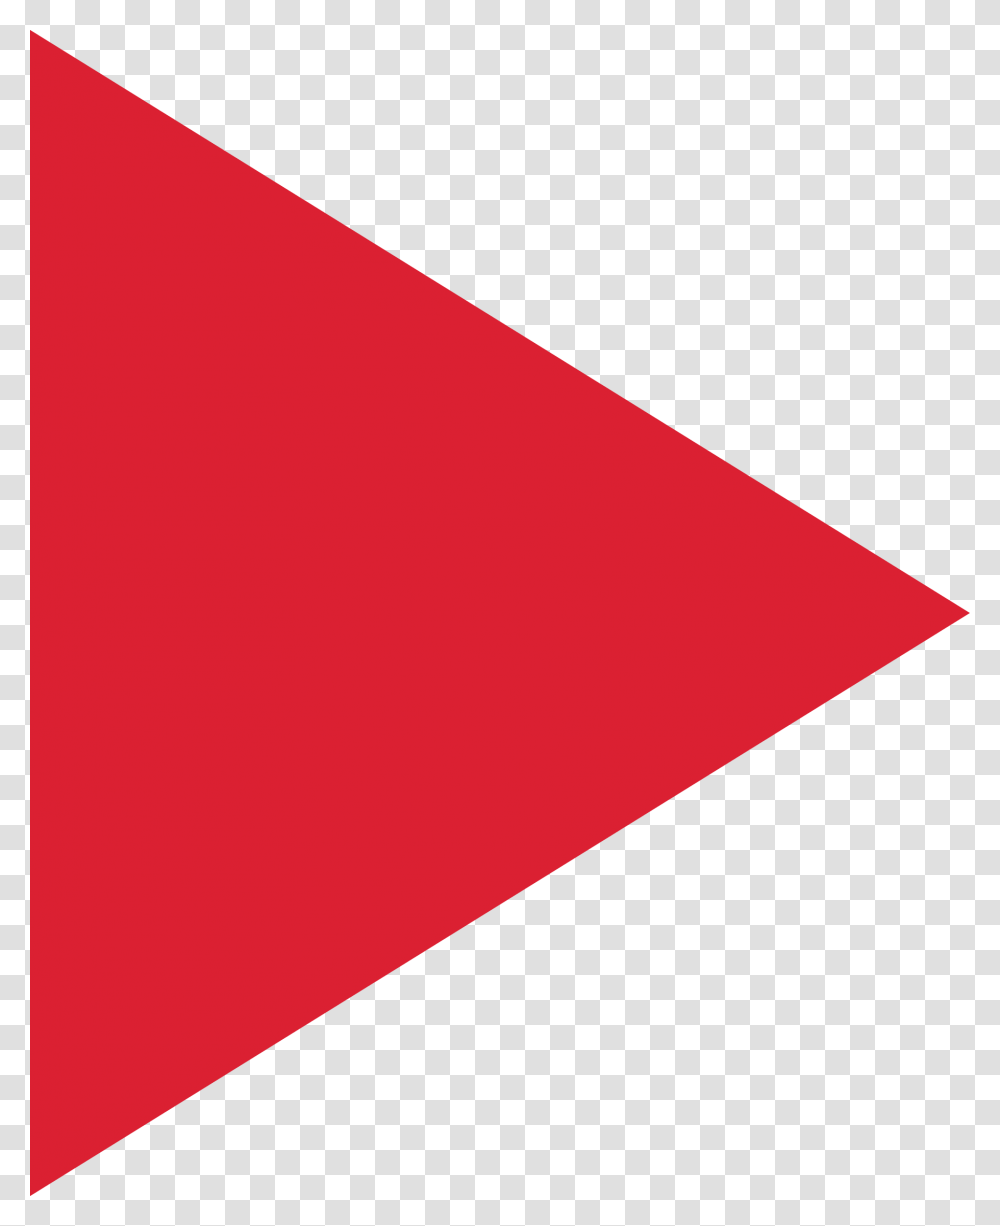 Thumb Image Red Arrow Right, Triangle, Label Transparent Png